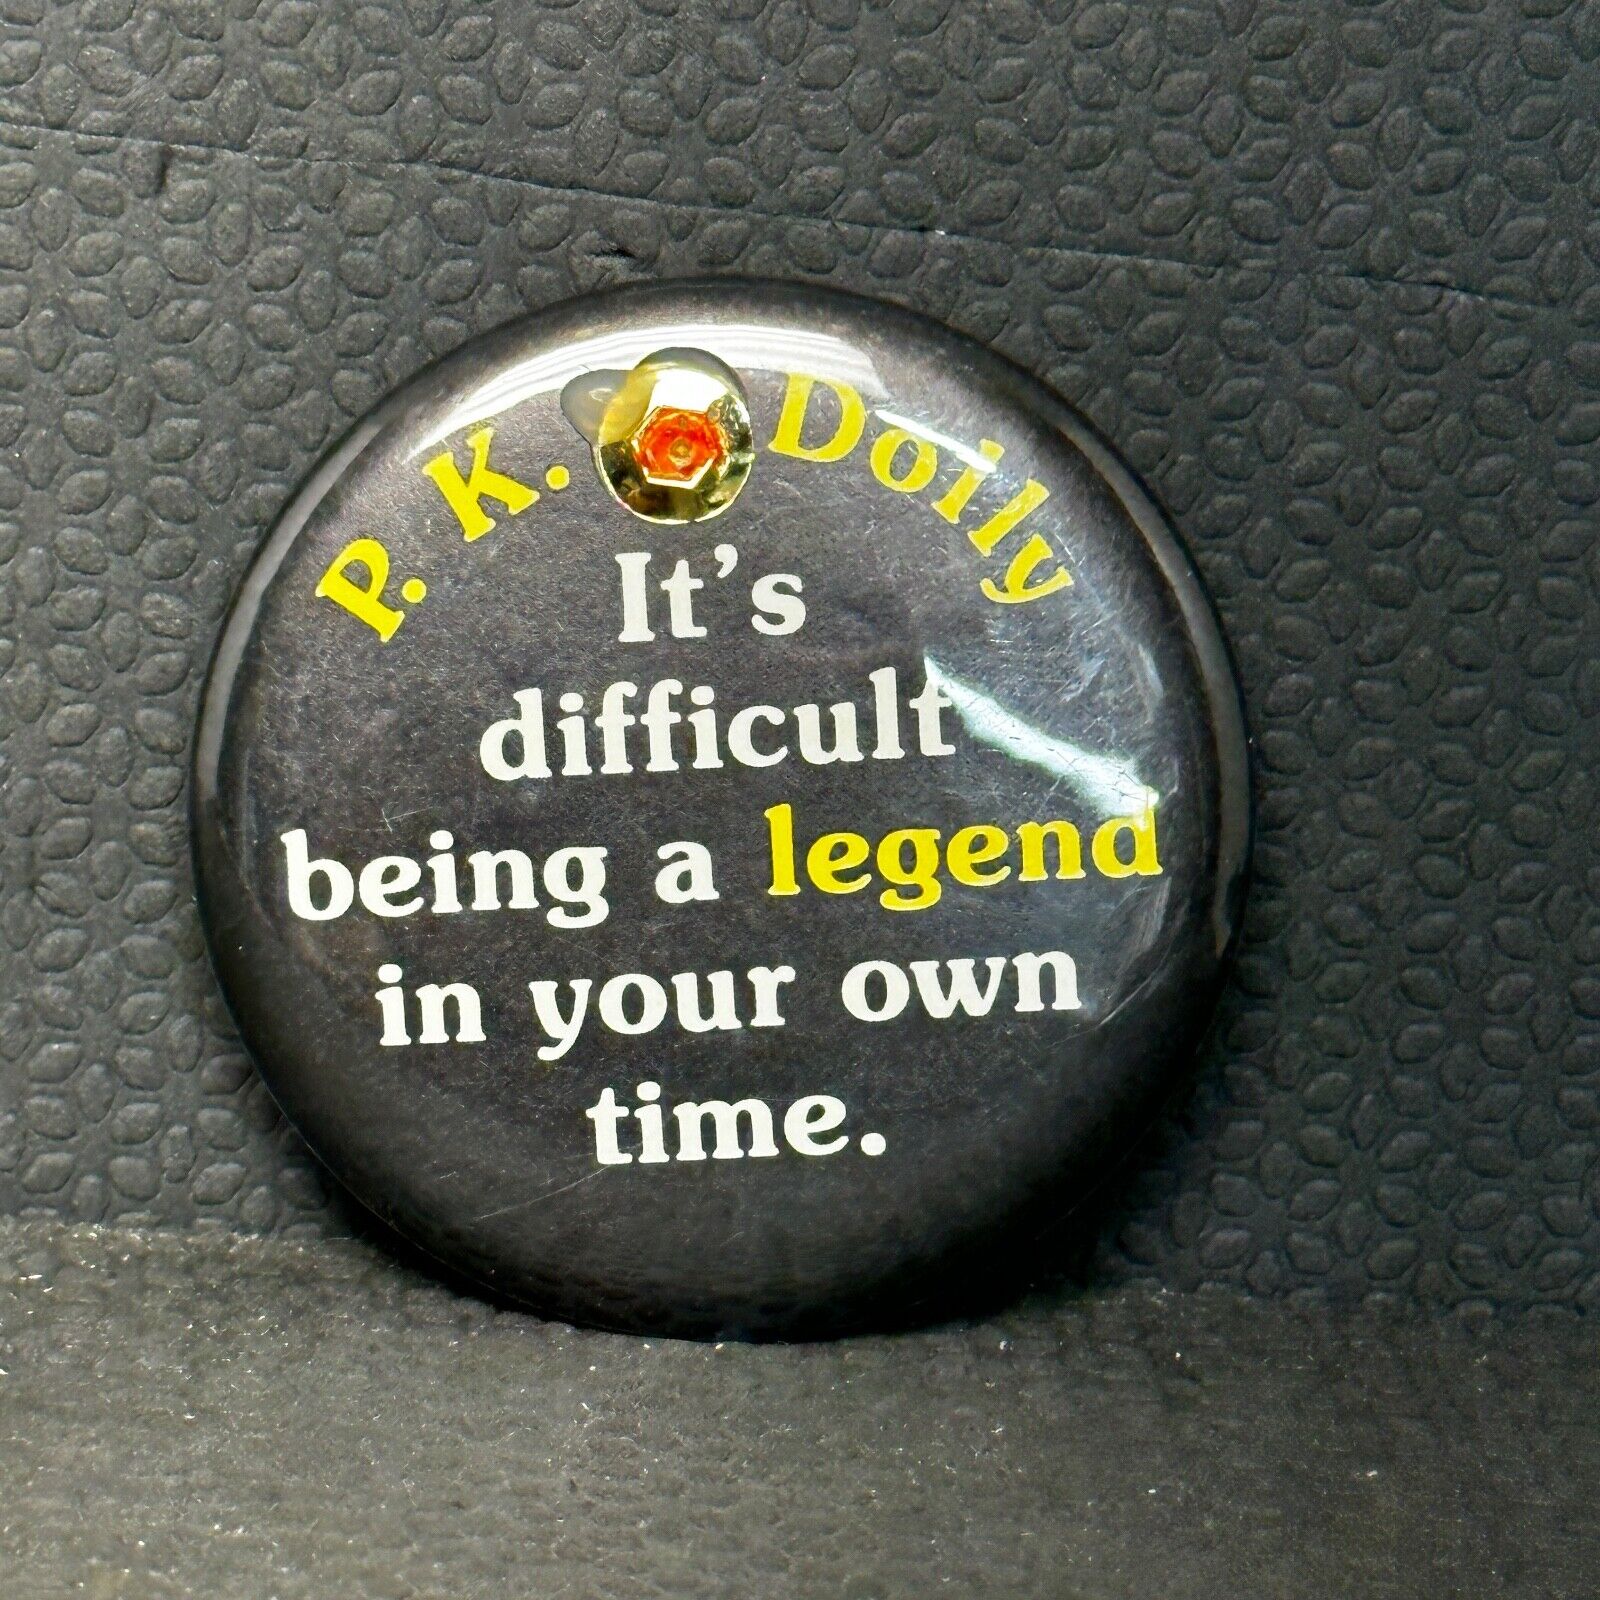 Vintage P. K. Dolly It's difficult being a legend in your own time pin button